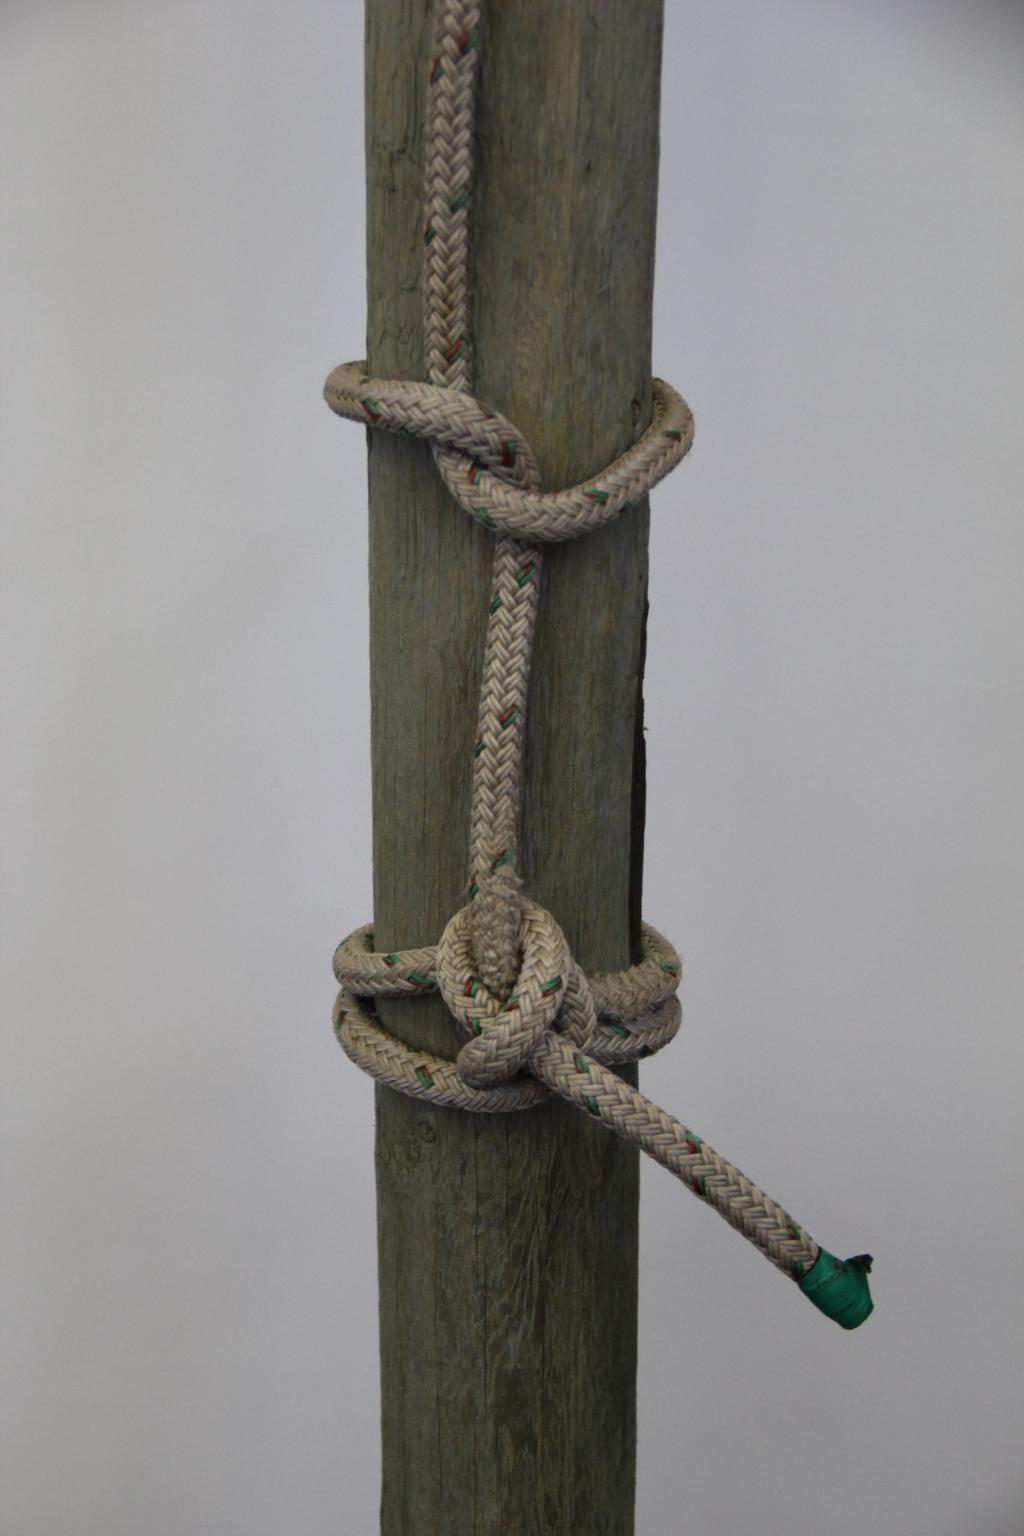 The purpose is to reduce the chances of the primary knot slipping off the piece and to create a more favorable bend ratio in the line before the primary knot.